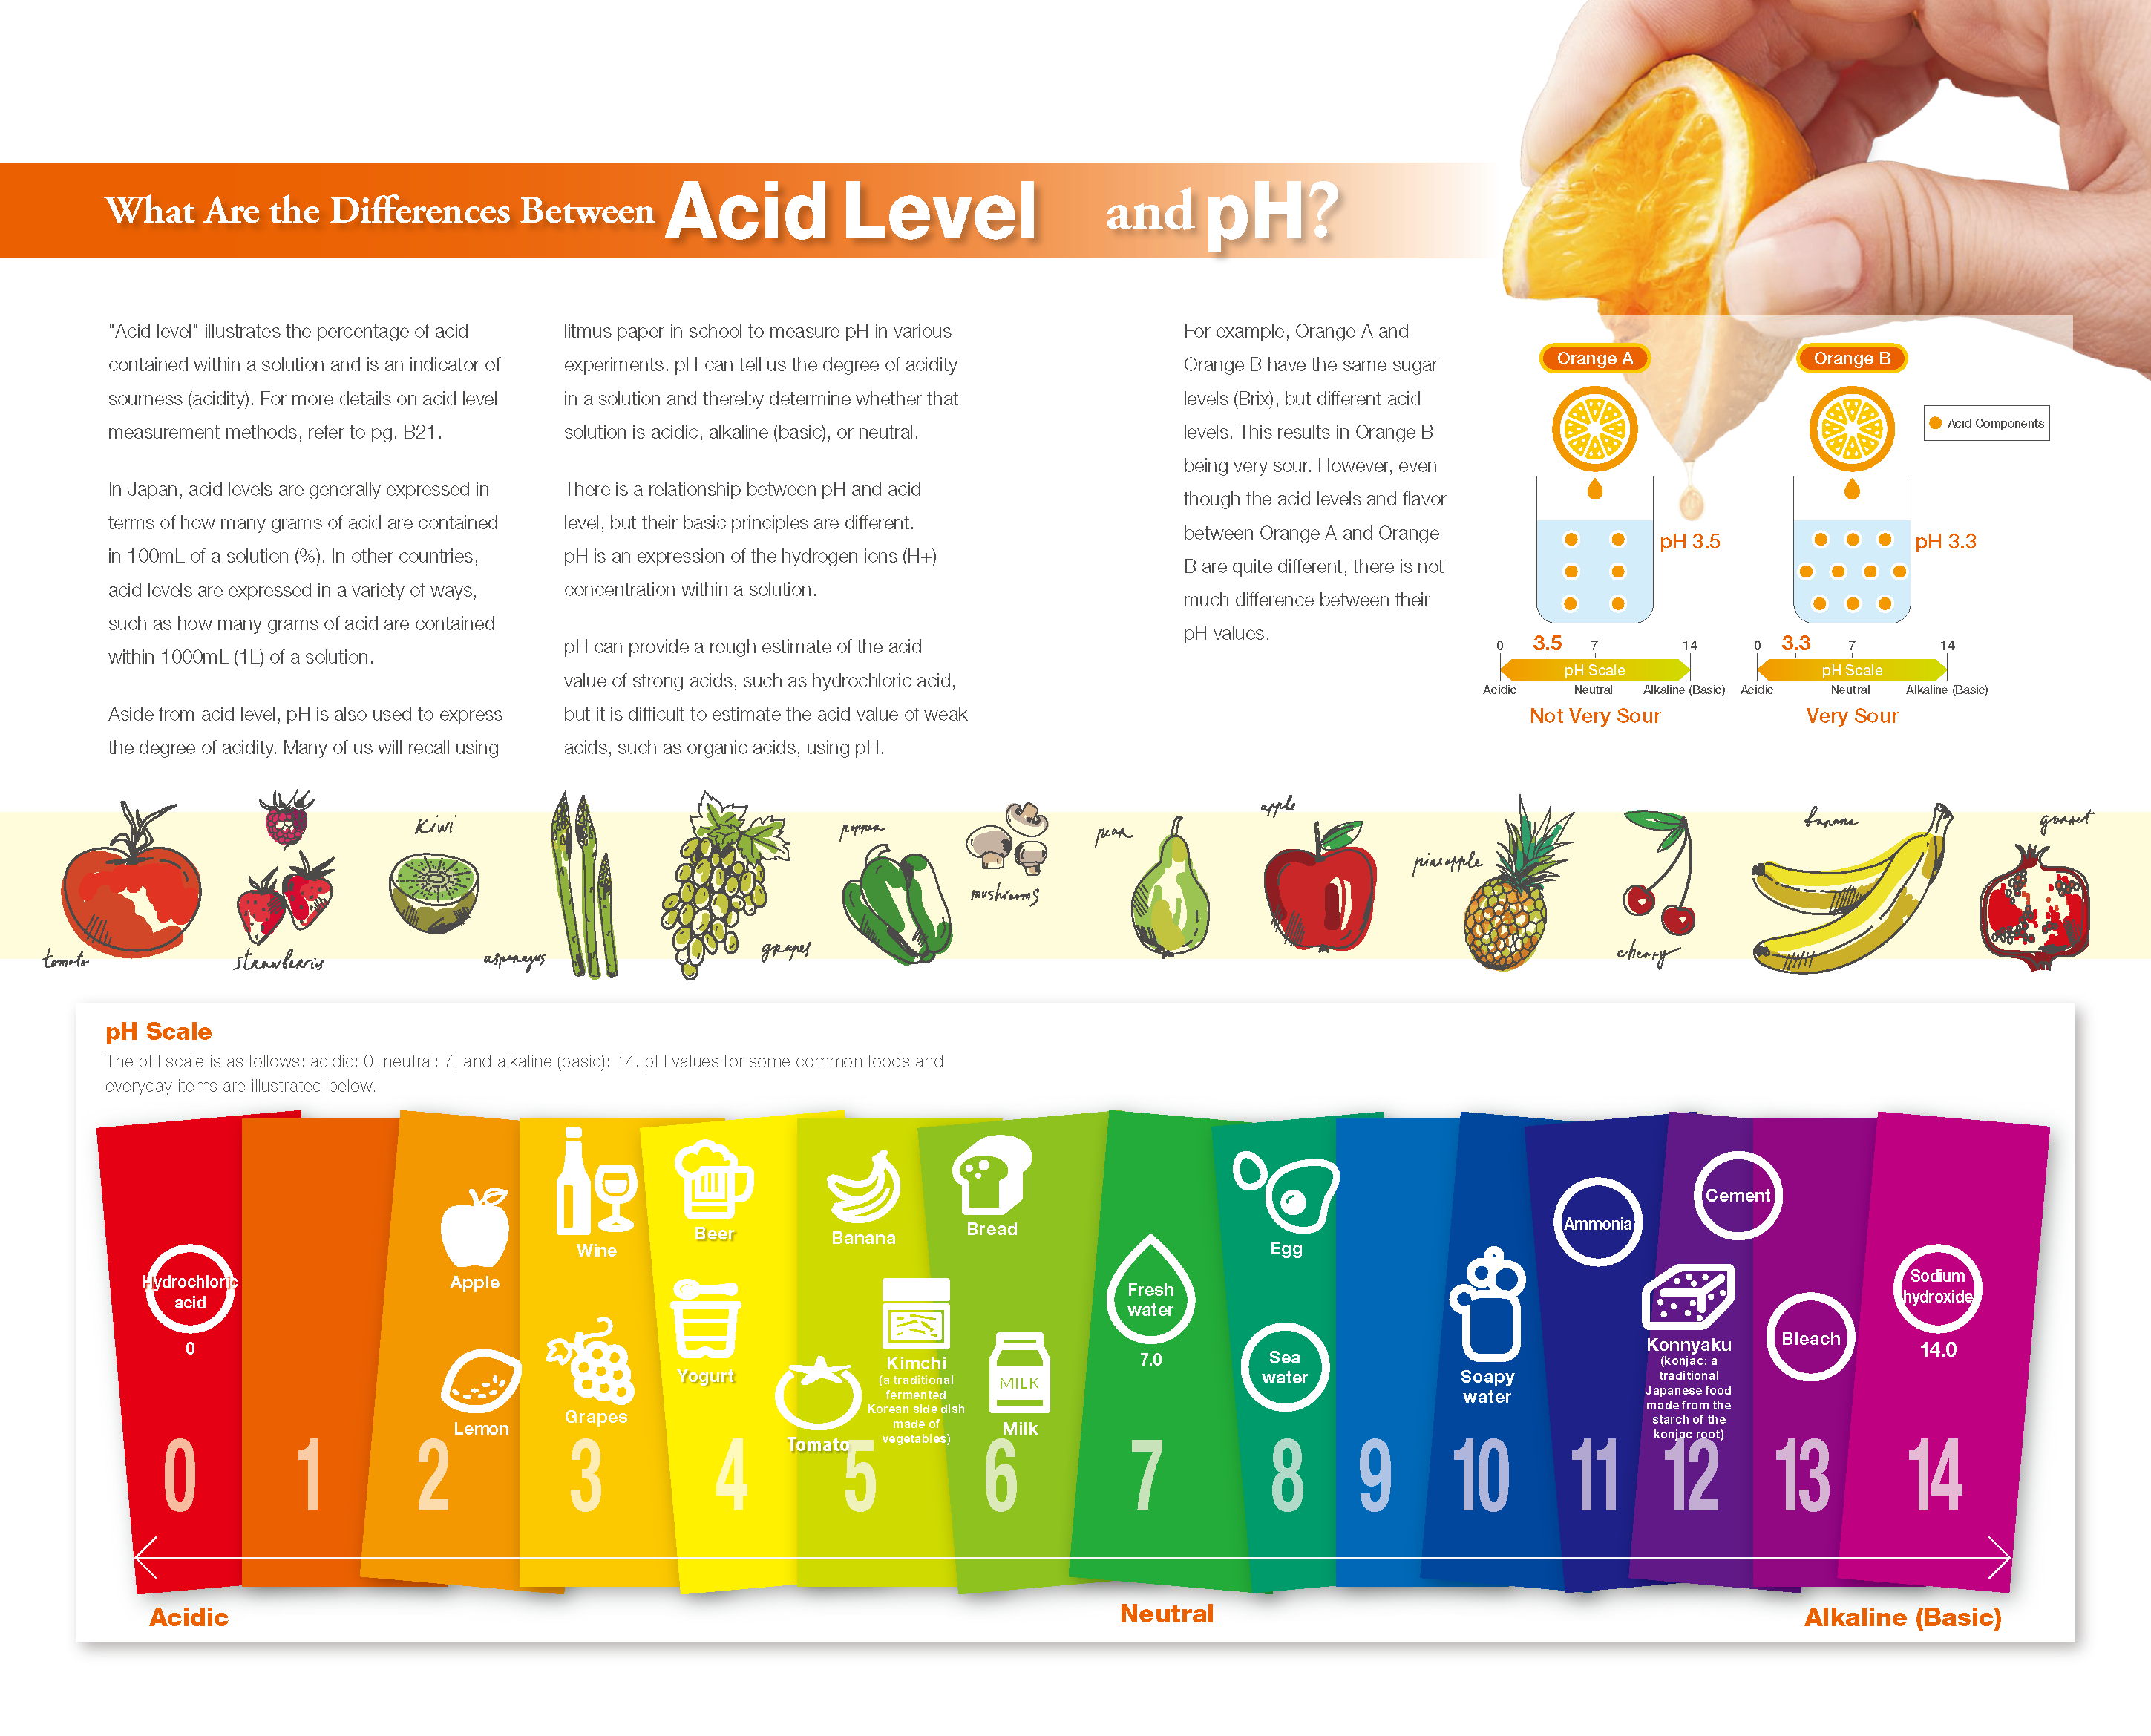 What Are the Differences Between Acid Level and pH?